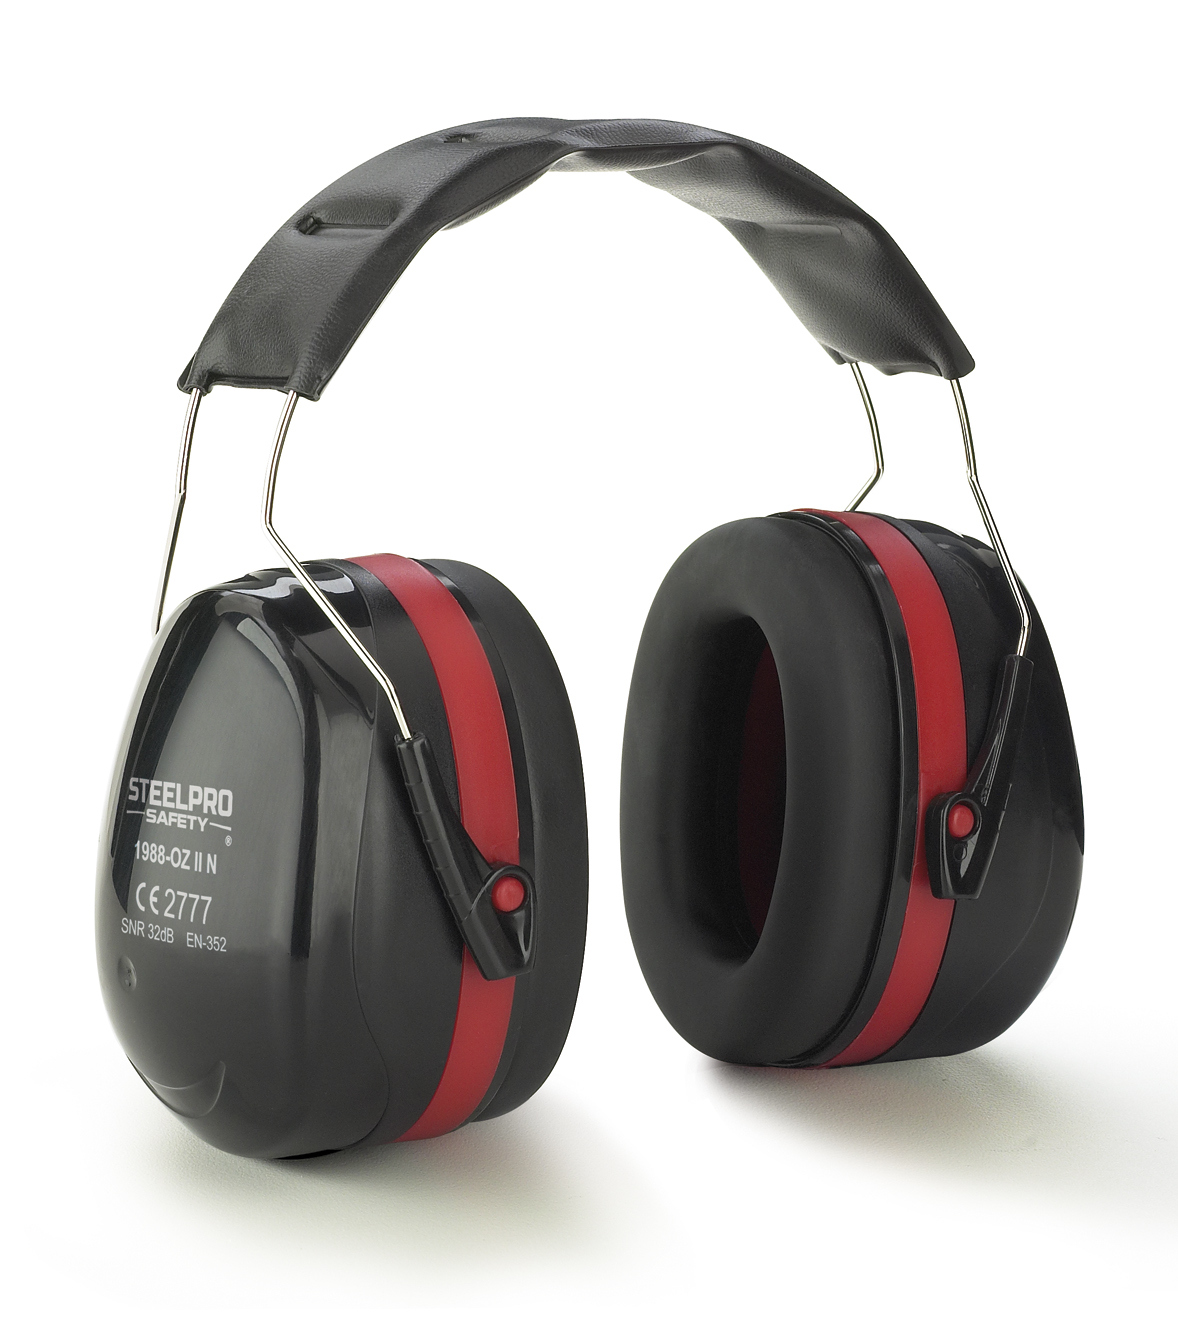 1988-OZ II N Hearing Protection Earplugs STEELPRO® ZEN Black series earmuff for hearing protection with high attenuation.